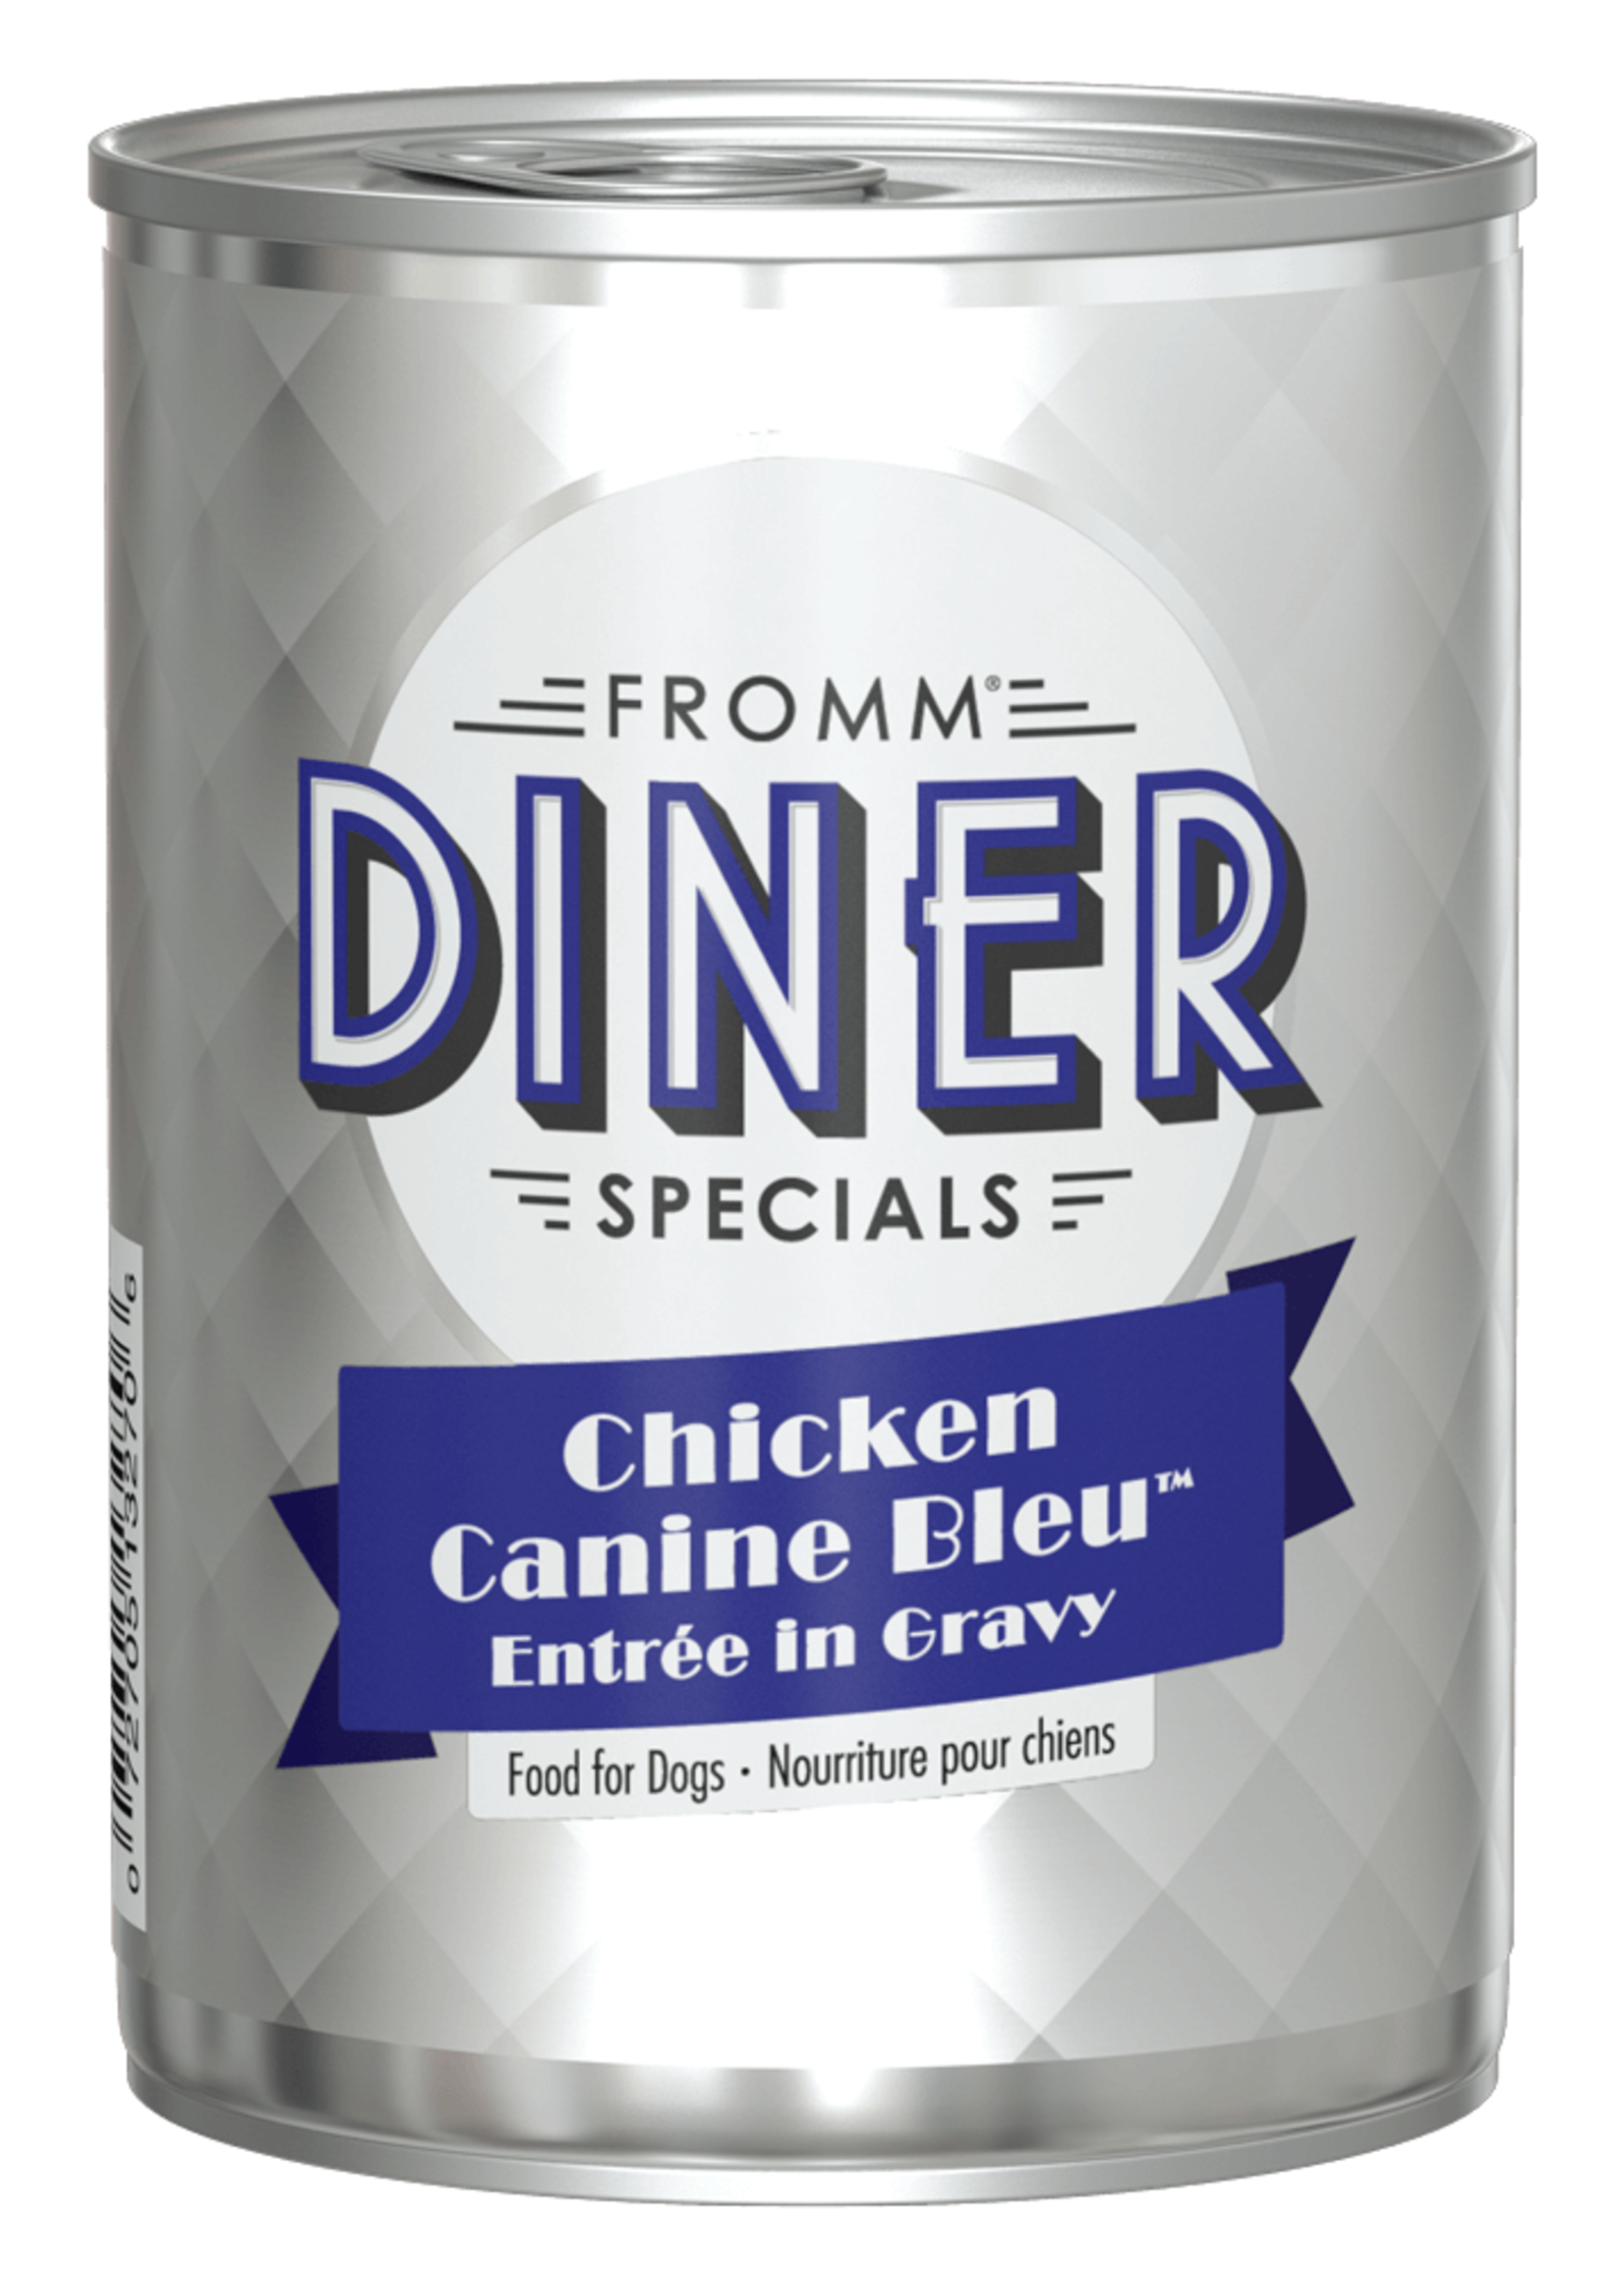 Fromm Family Pet Food Fromm Dog Diner Specials Chicken Canine Bleu Entre in Gravy 12/12.5 oz